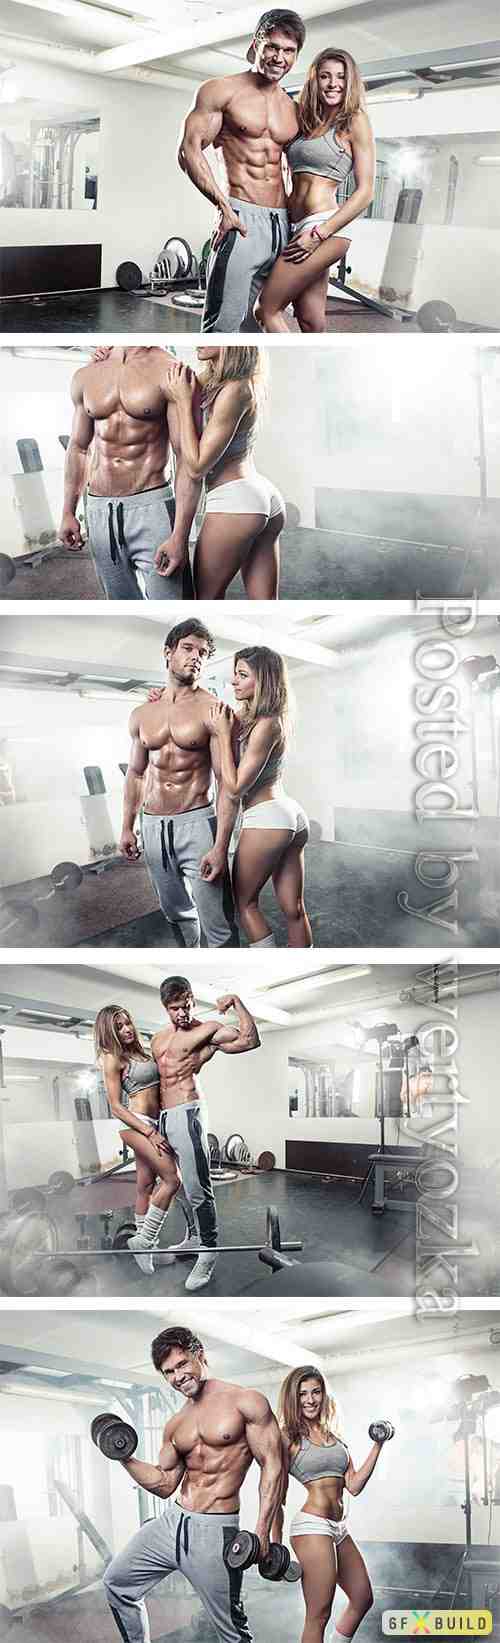 Girl and man in the gym